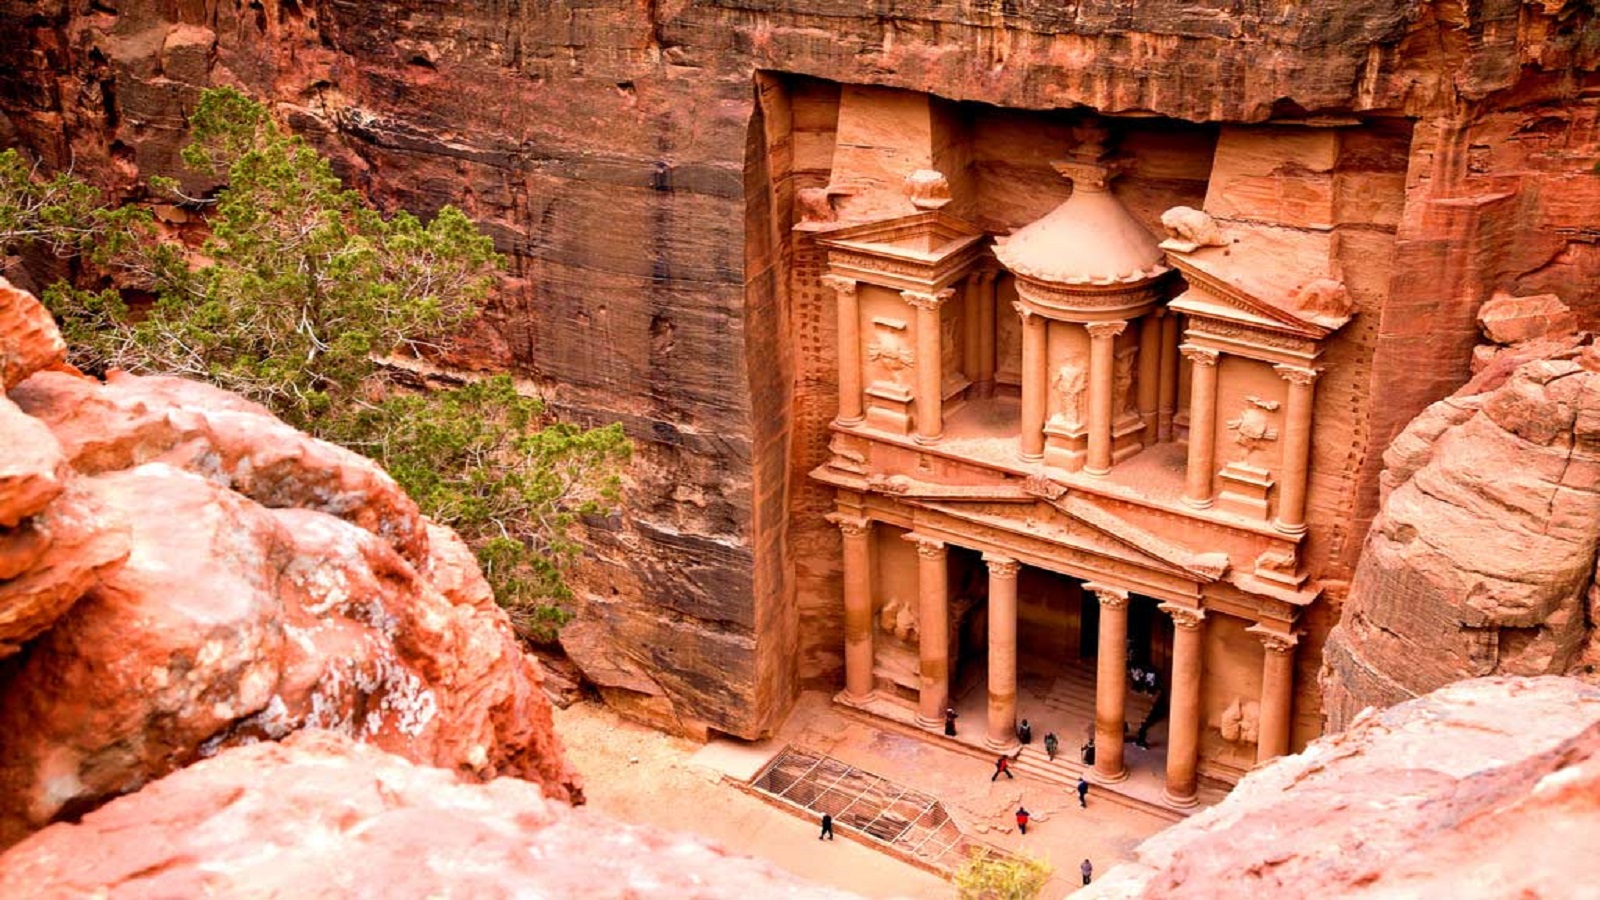 PETRA EXCURSION BY FERRY & BUS